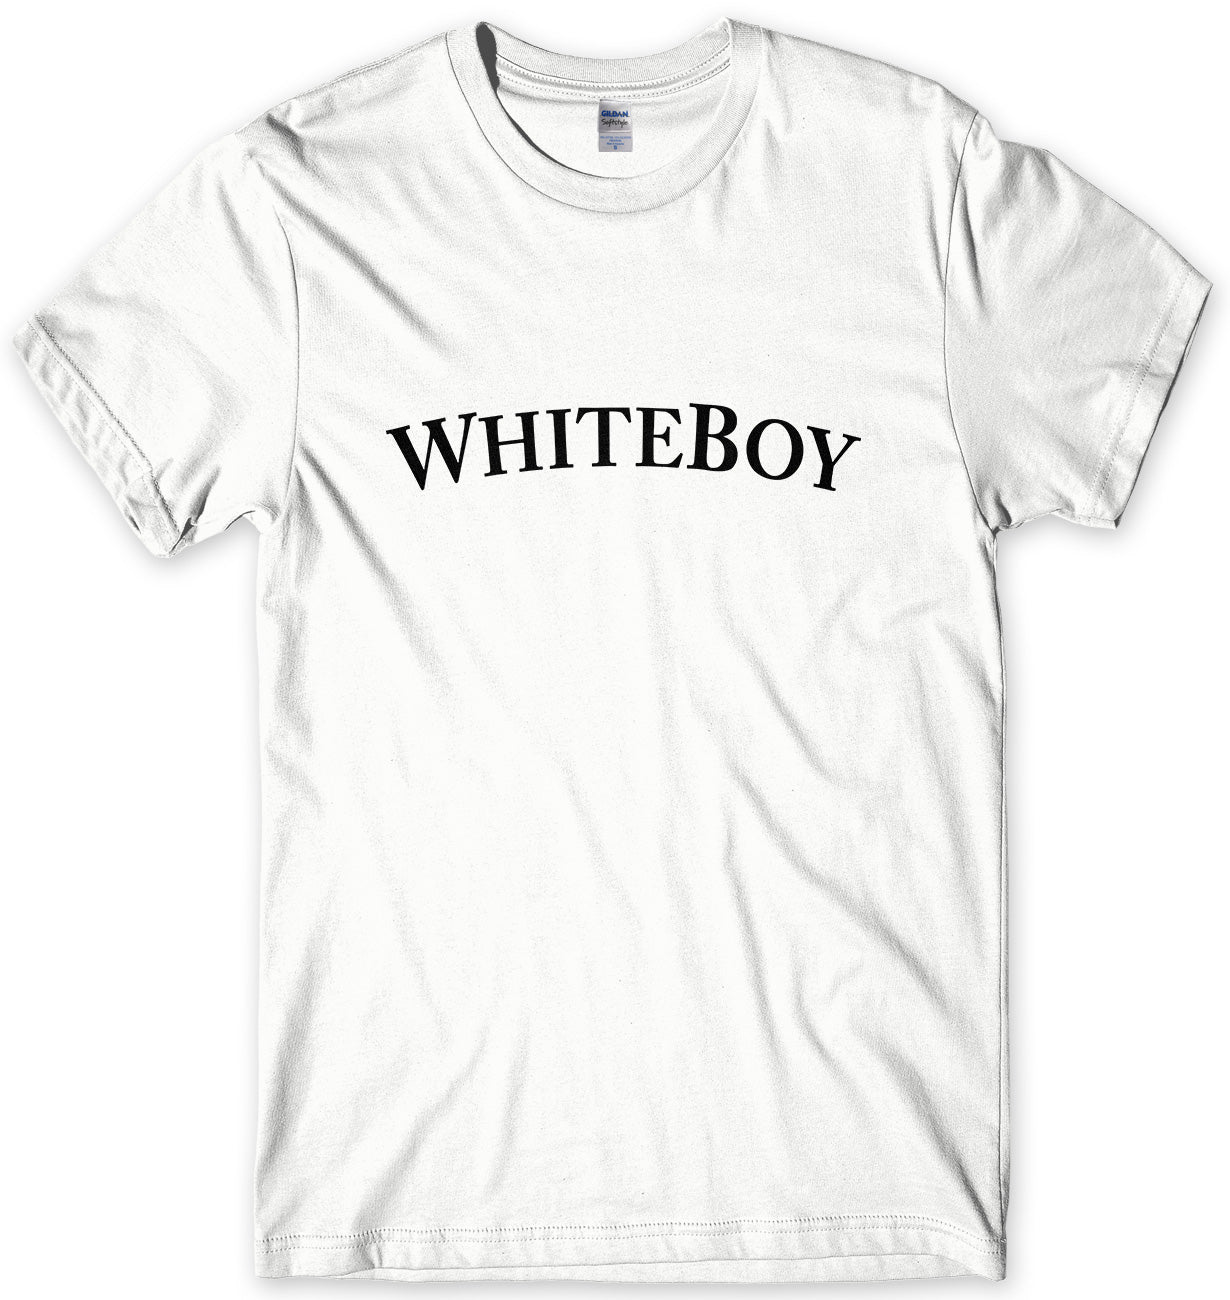 WHITE BOY - AS WORN BY TOMMY LEE MENS UNISEX T-SHIRT